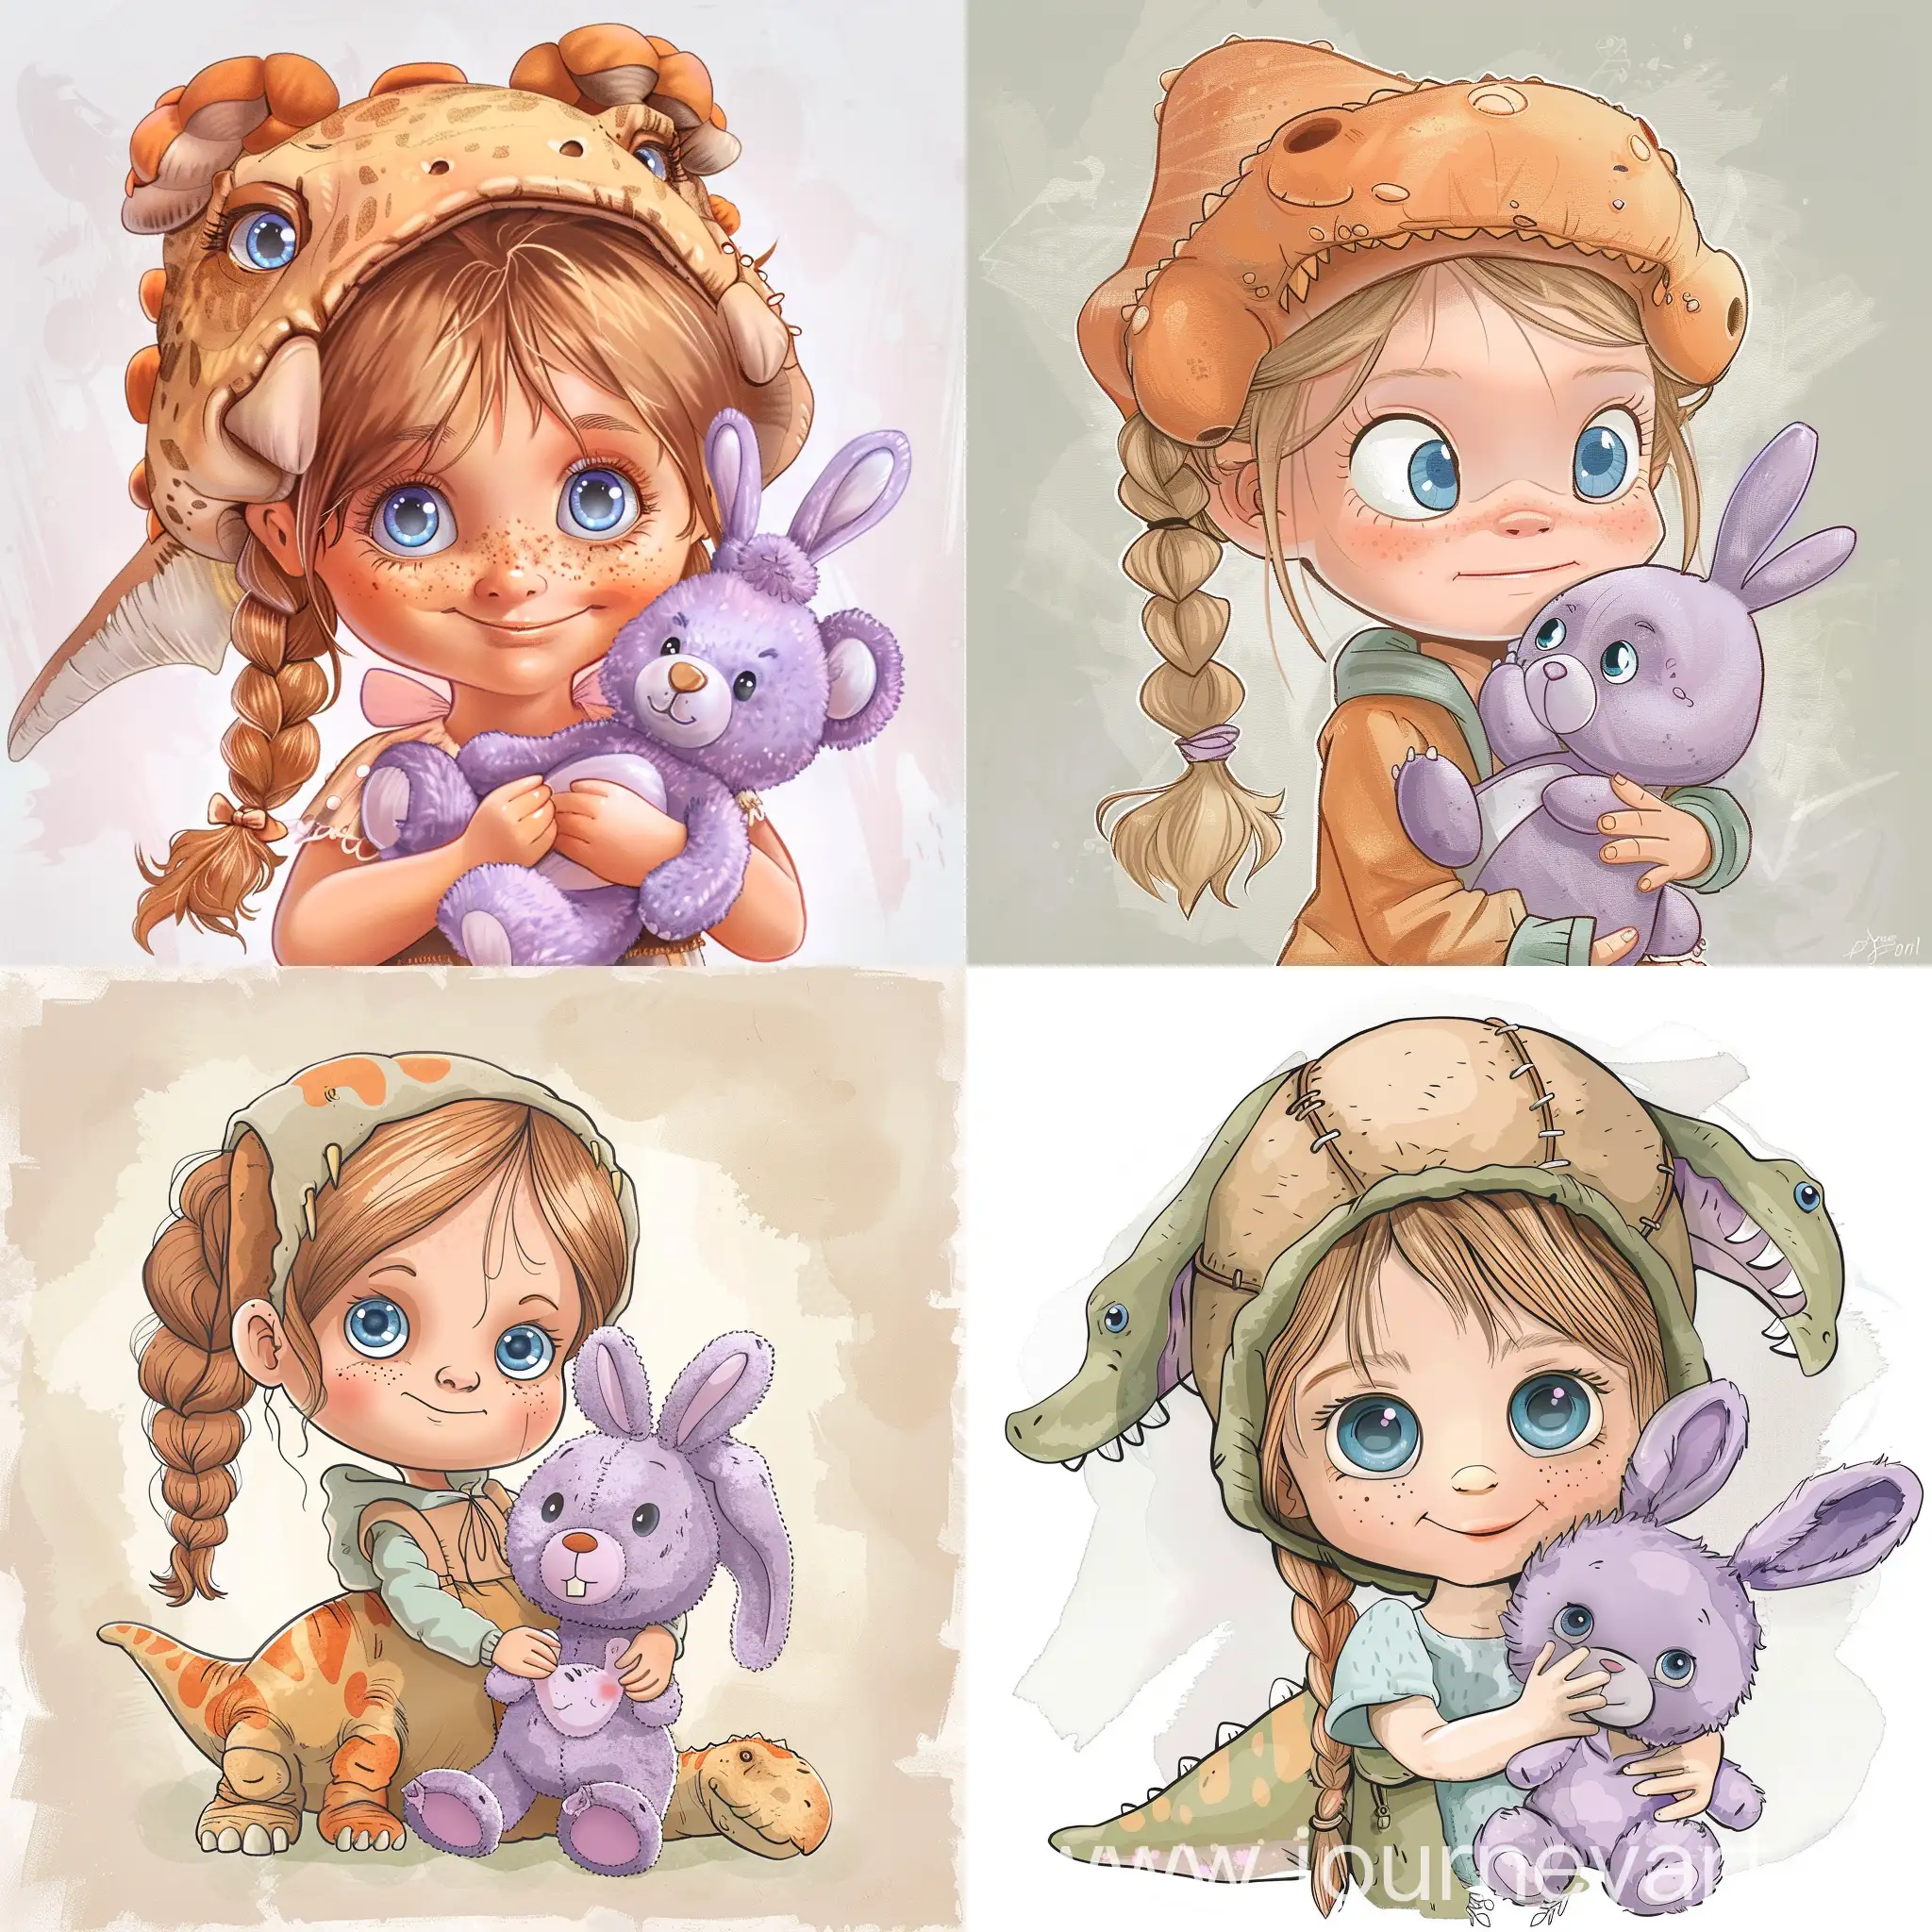 Cartoon of a little girl with blue eyes and sandy brown and blonde hair in a plait in a dinosaur costume holding a light purple bunny rabbit teddy 